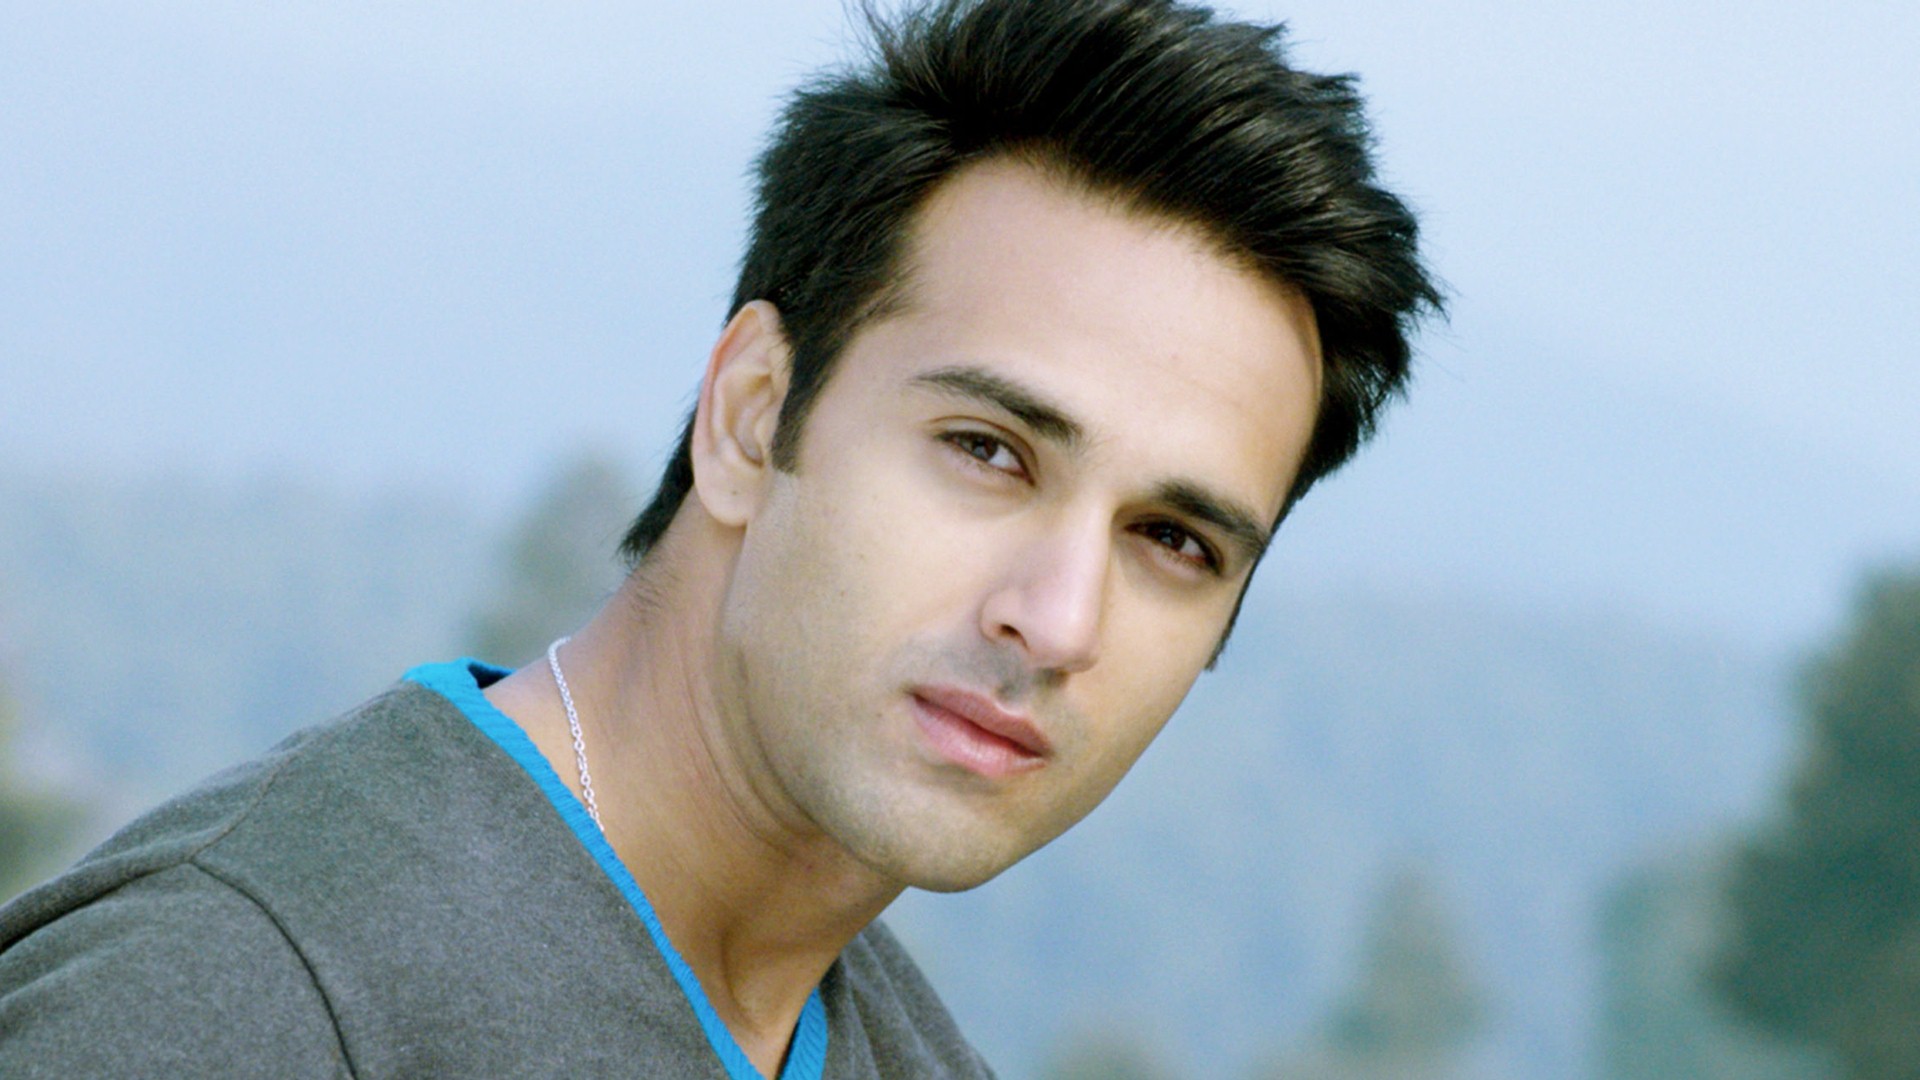 pulkit-samrat-sports-a-unique-salt-and-pepper-hairstyle -for-the-film-taish-and-hairstylist-aalim-